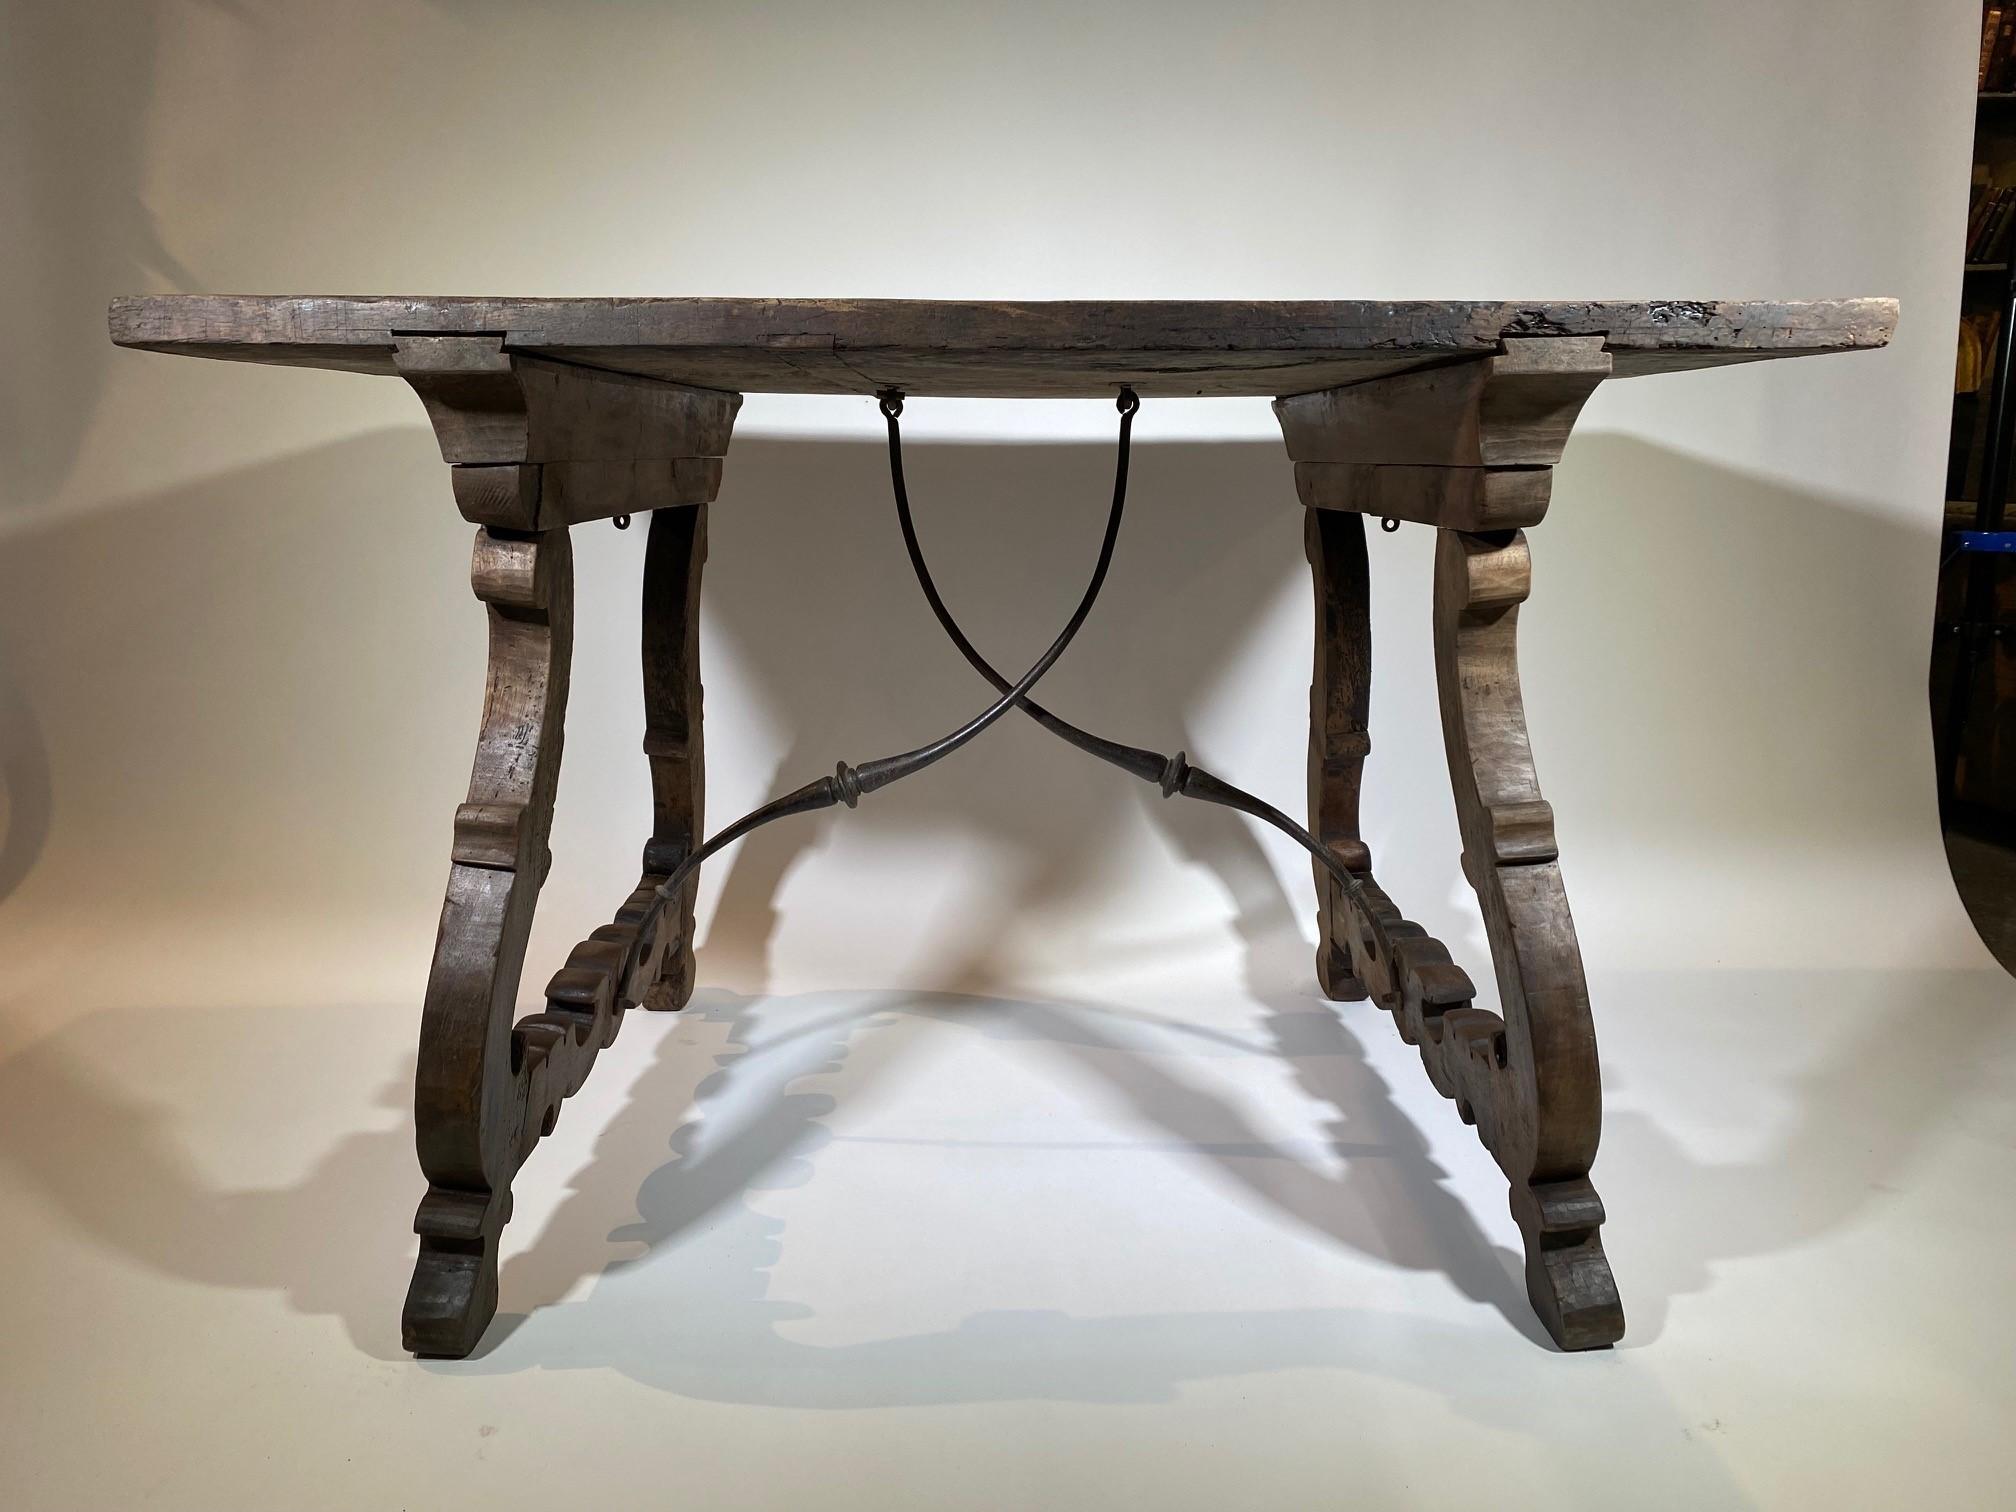 An exceptional and very beautiful mid-18th century writing table from the Catalan region of Spain. Beautifully constructed from stunning walnut with a solid board top and hand forged iron stretchers. Fabulous patina and graining.